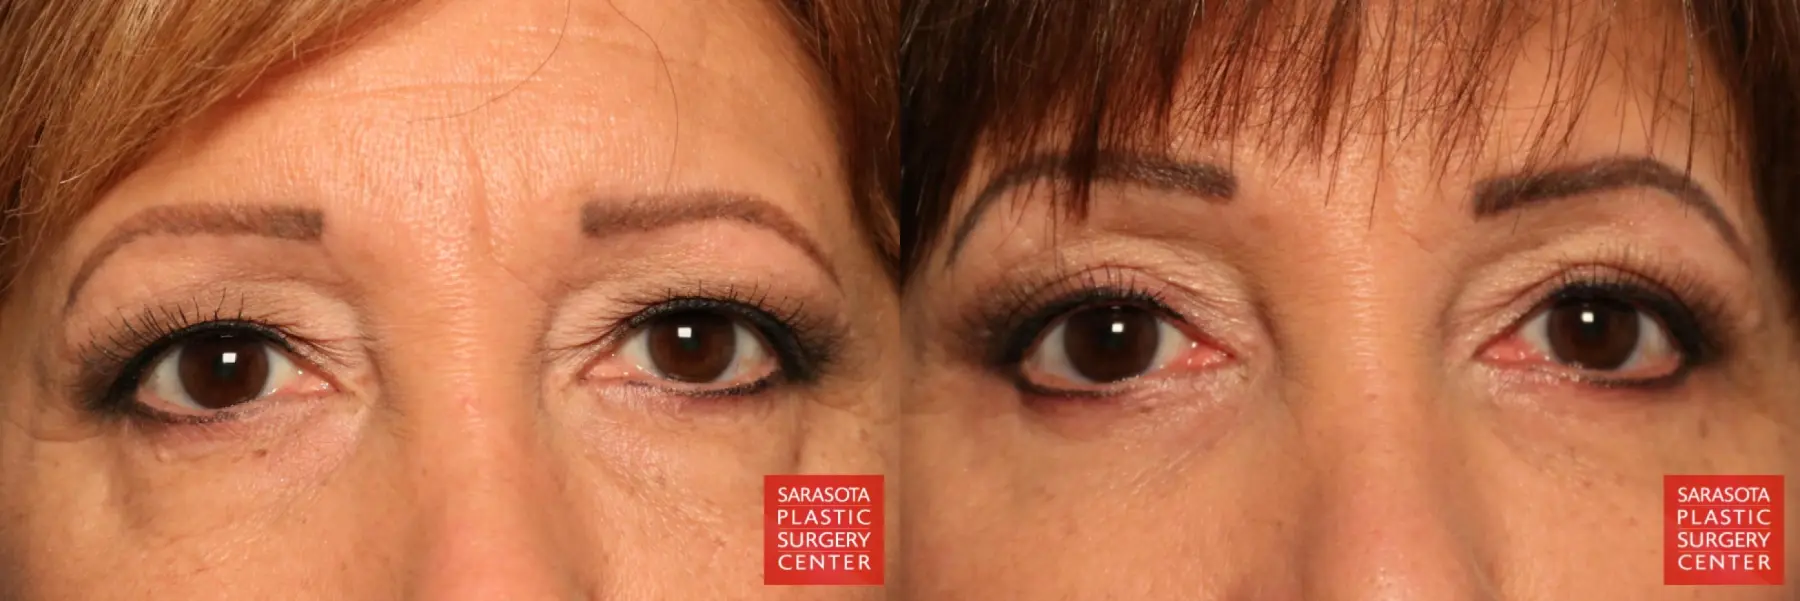 Eyelid Lift: Patient 9 - Before and After  